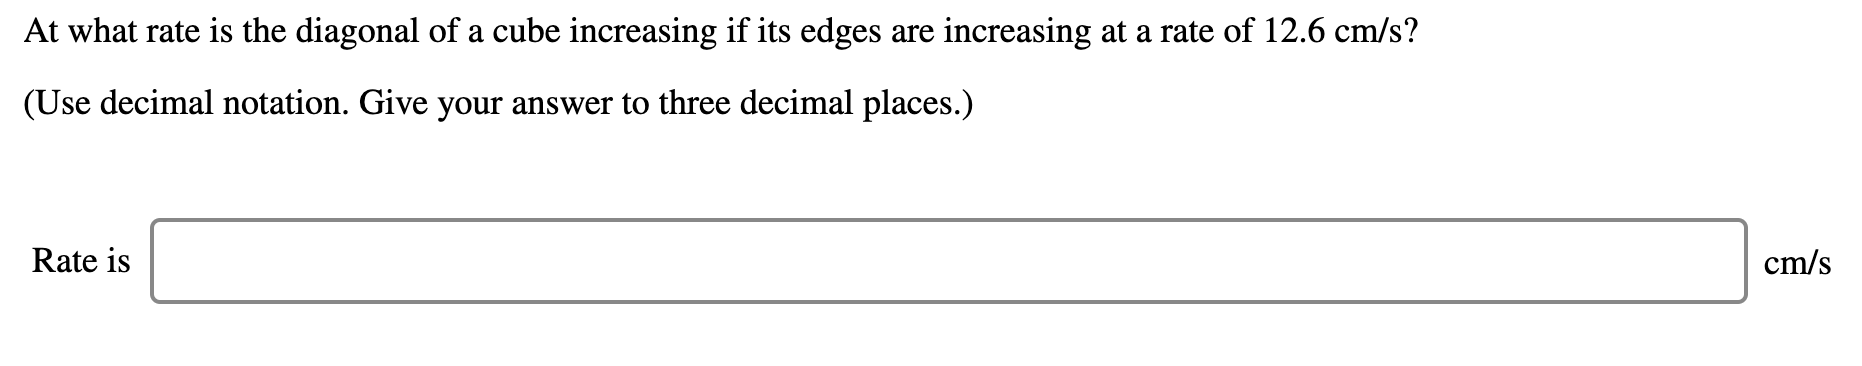 At what rate is the diagonal of a cube increasing if its edges are increasing at a rate of 12.6 cm/s?
(Use decimal notation. Give your answer to three decimal places.)
Rate is
cm/s
